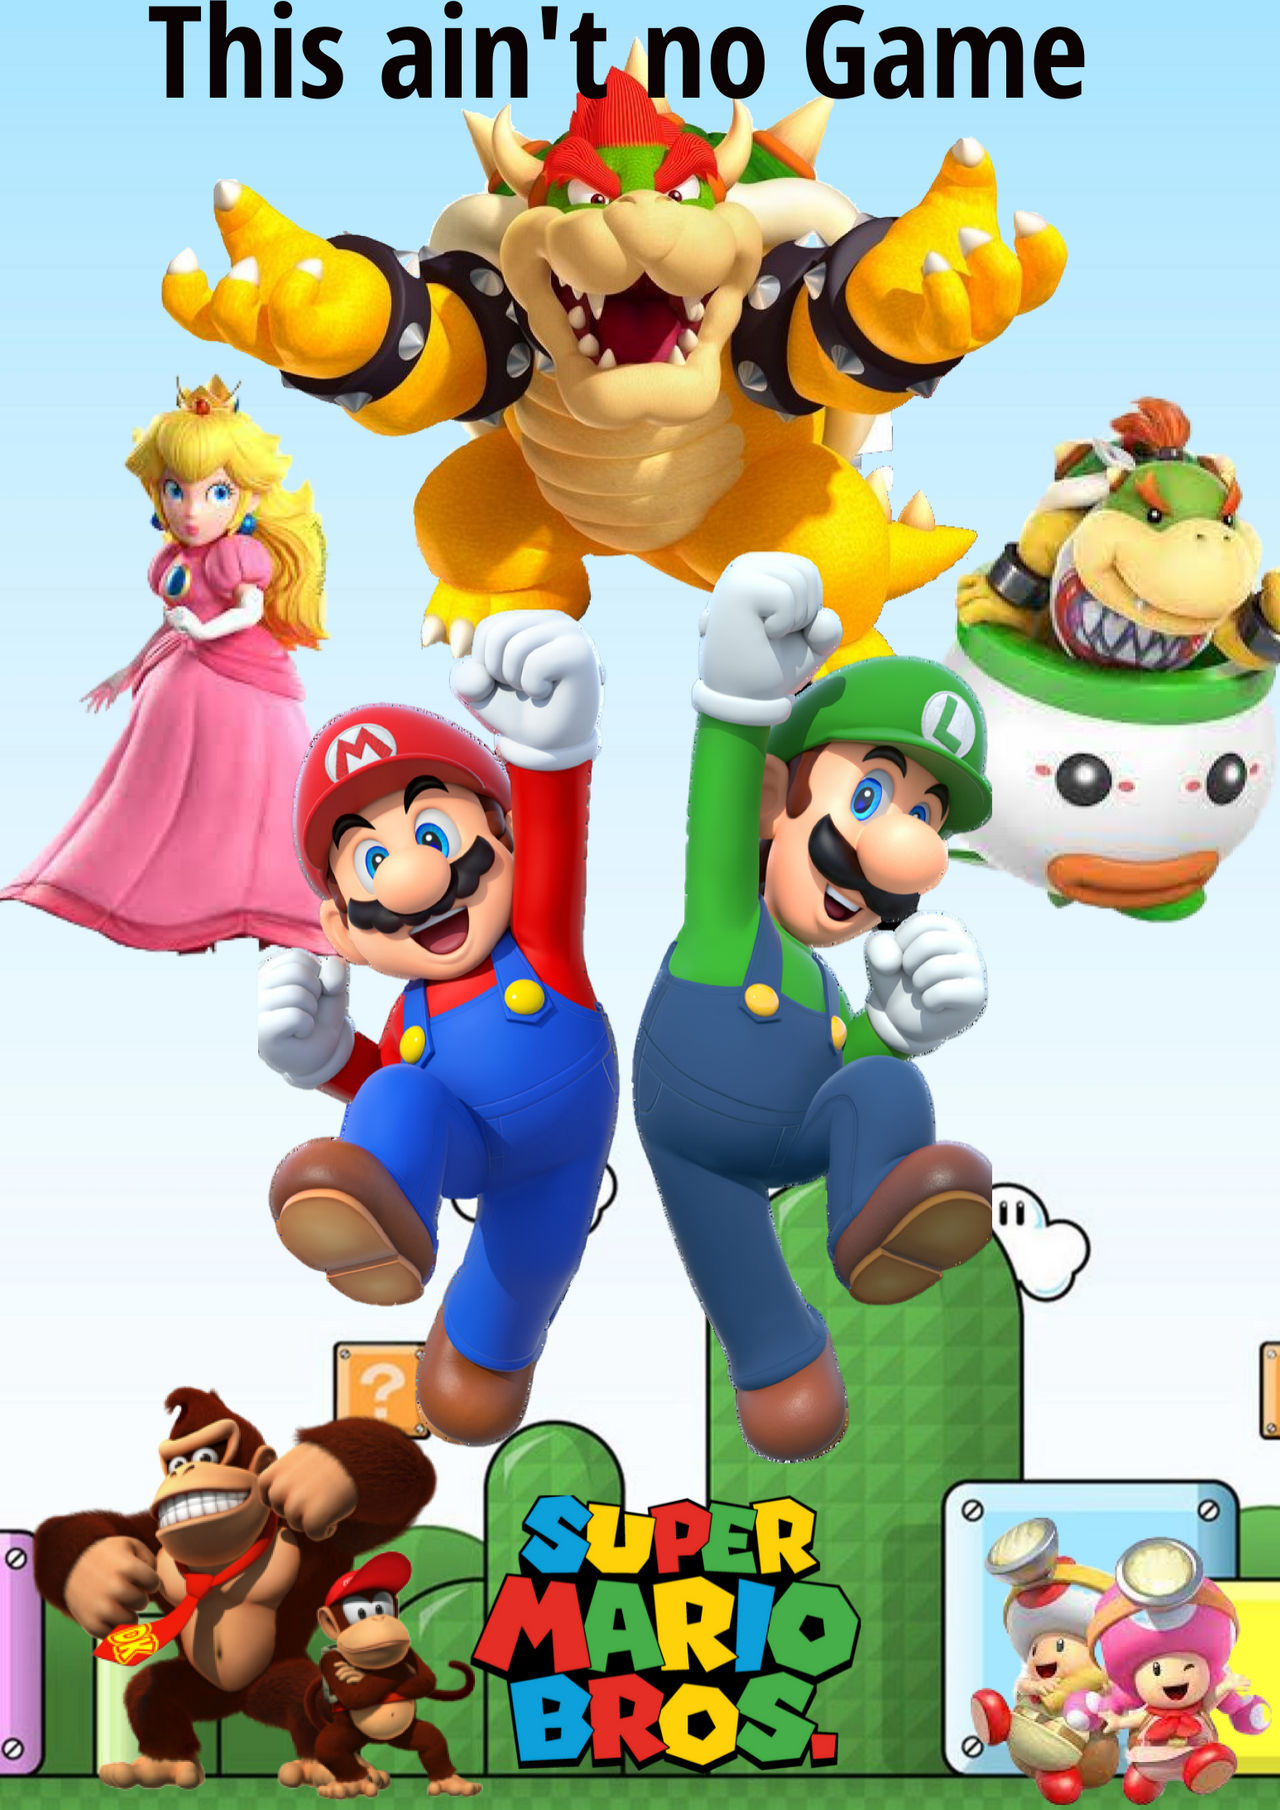 Super Mario MOVIE: Official New Theatrical Poster Shows Off 8 Main  Characters